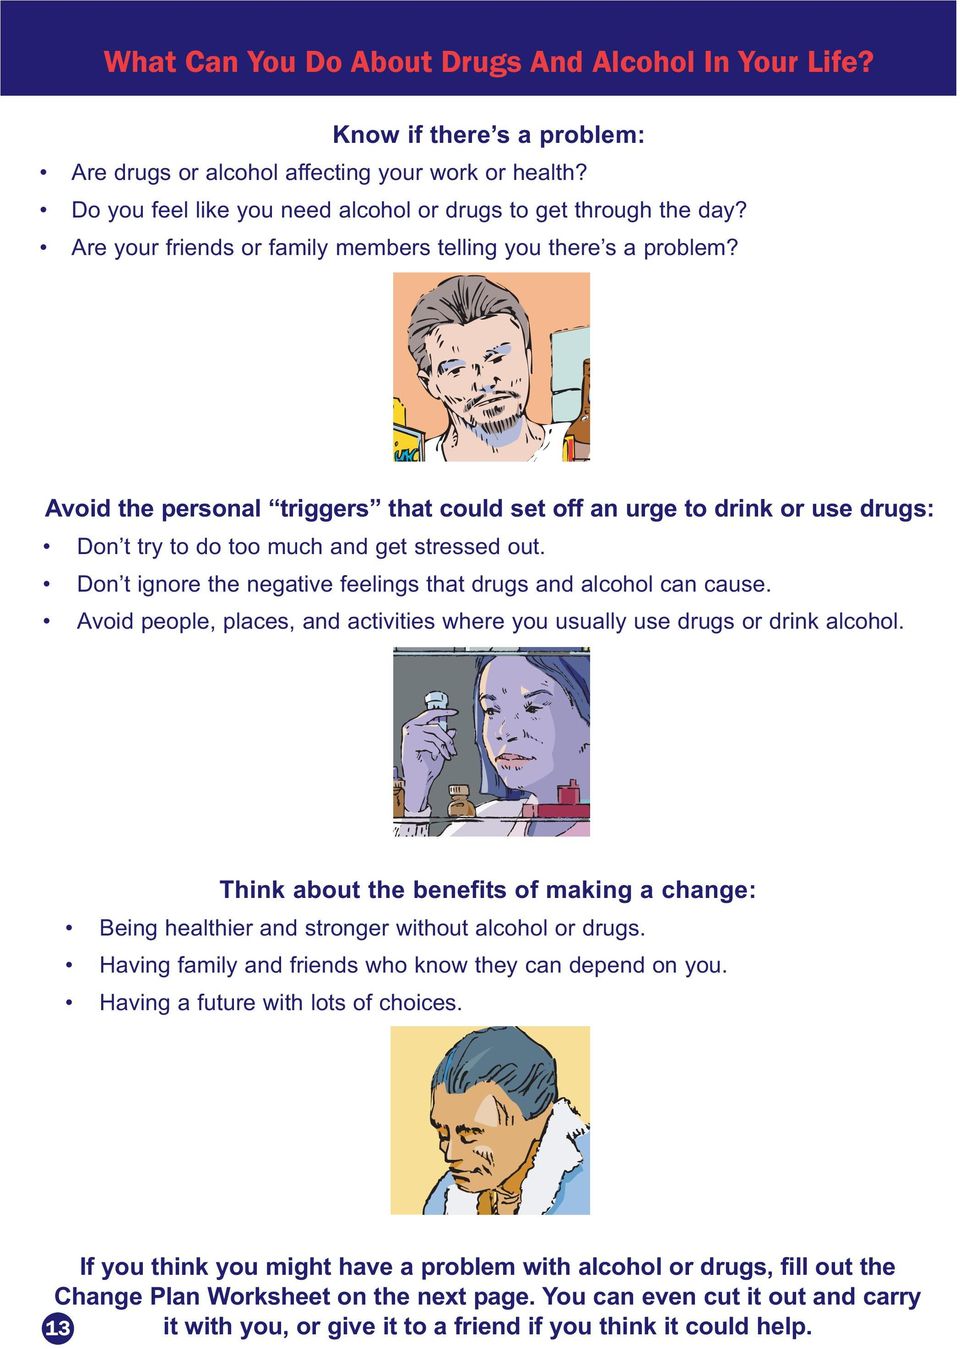 Don t ignore the negative feelings that drugs and alcohol can cause. Avoid people, places, and activities where you usually use drugs or drink alcohol.